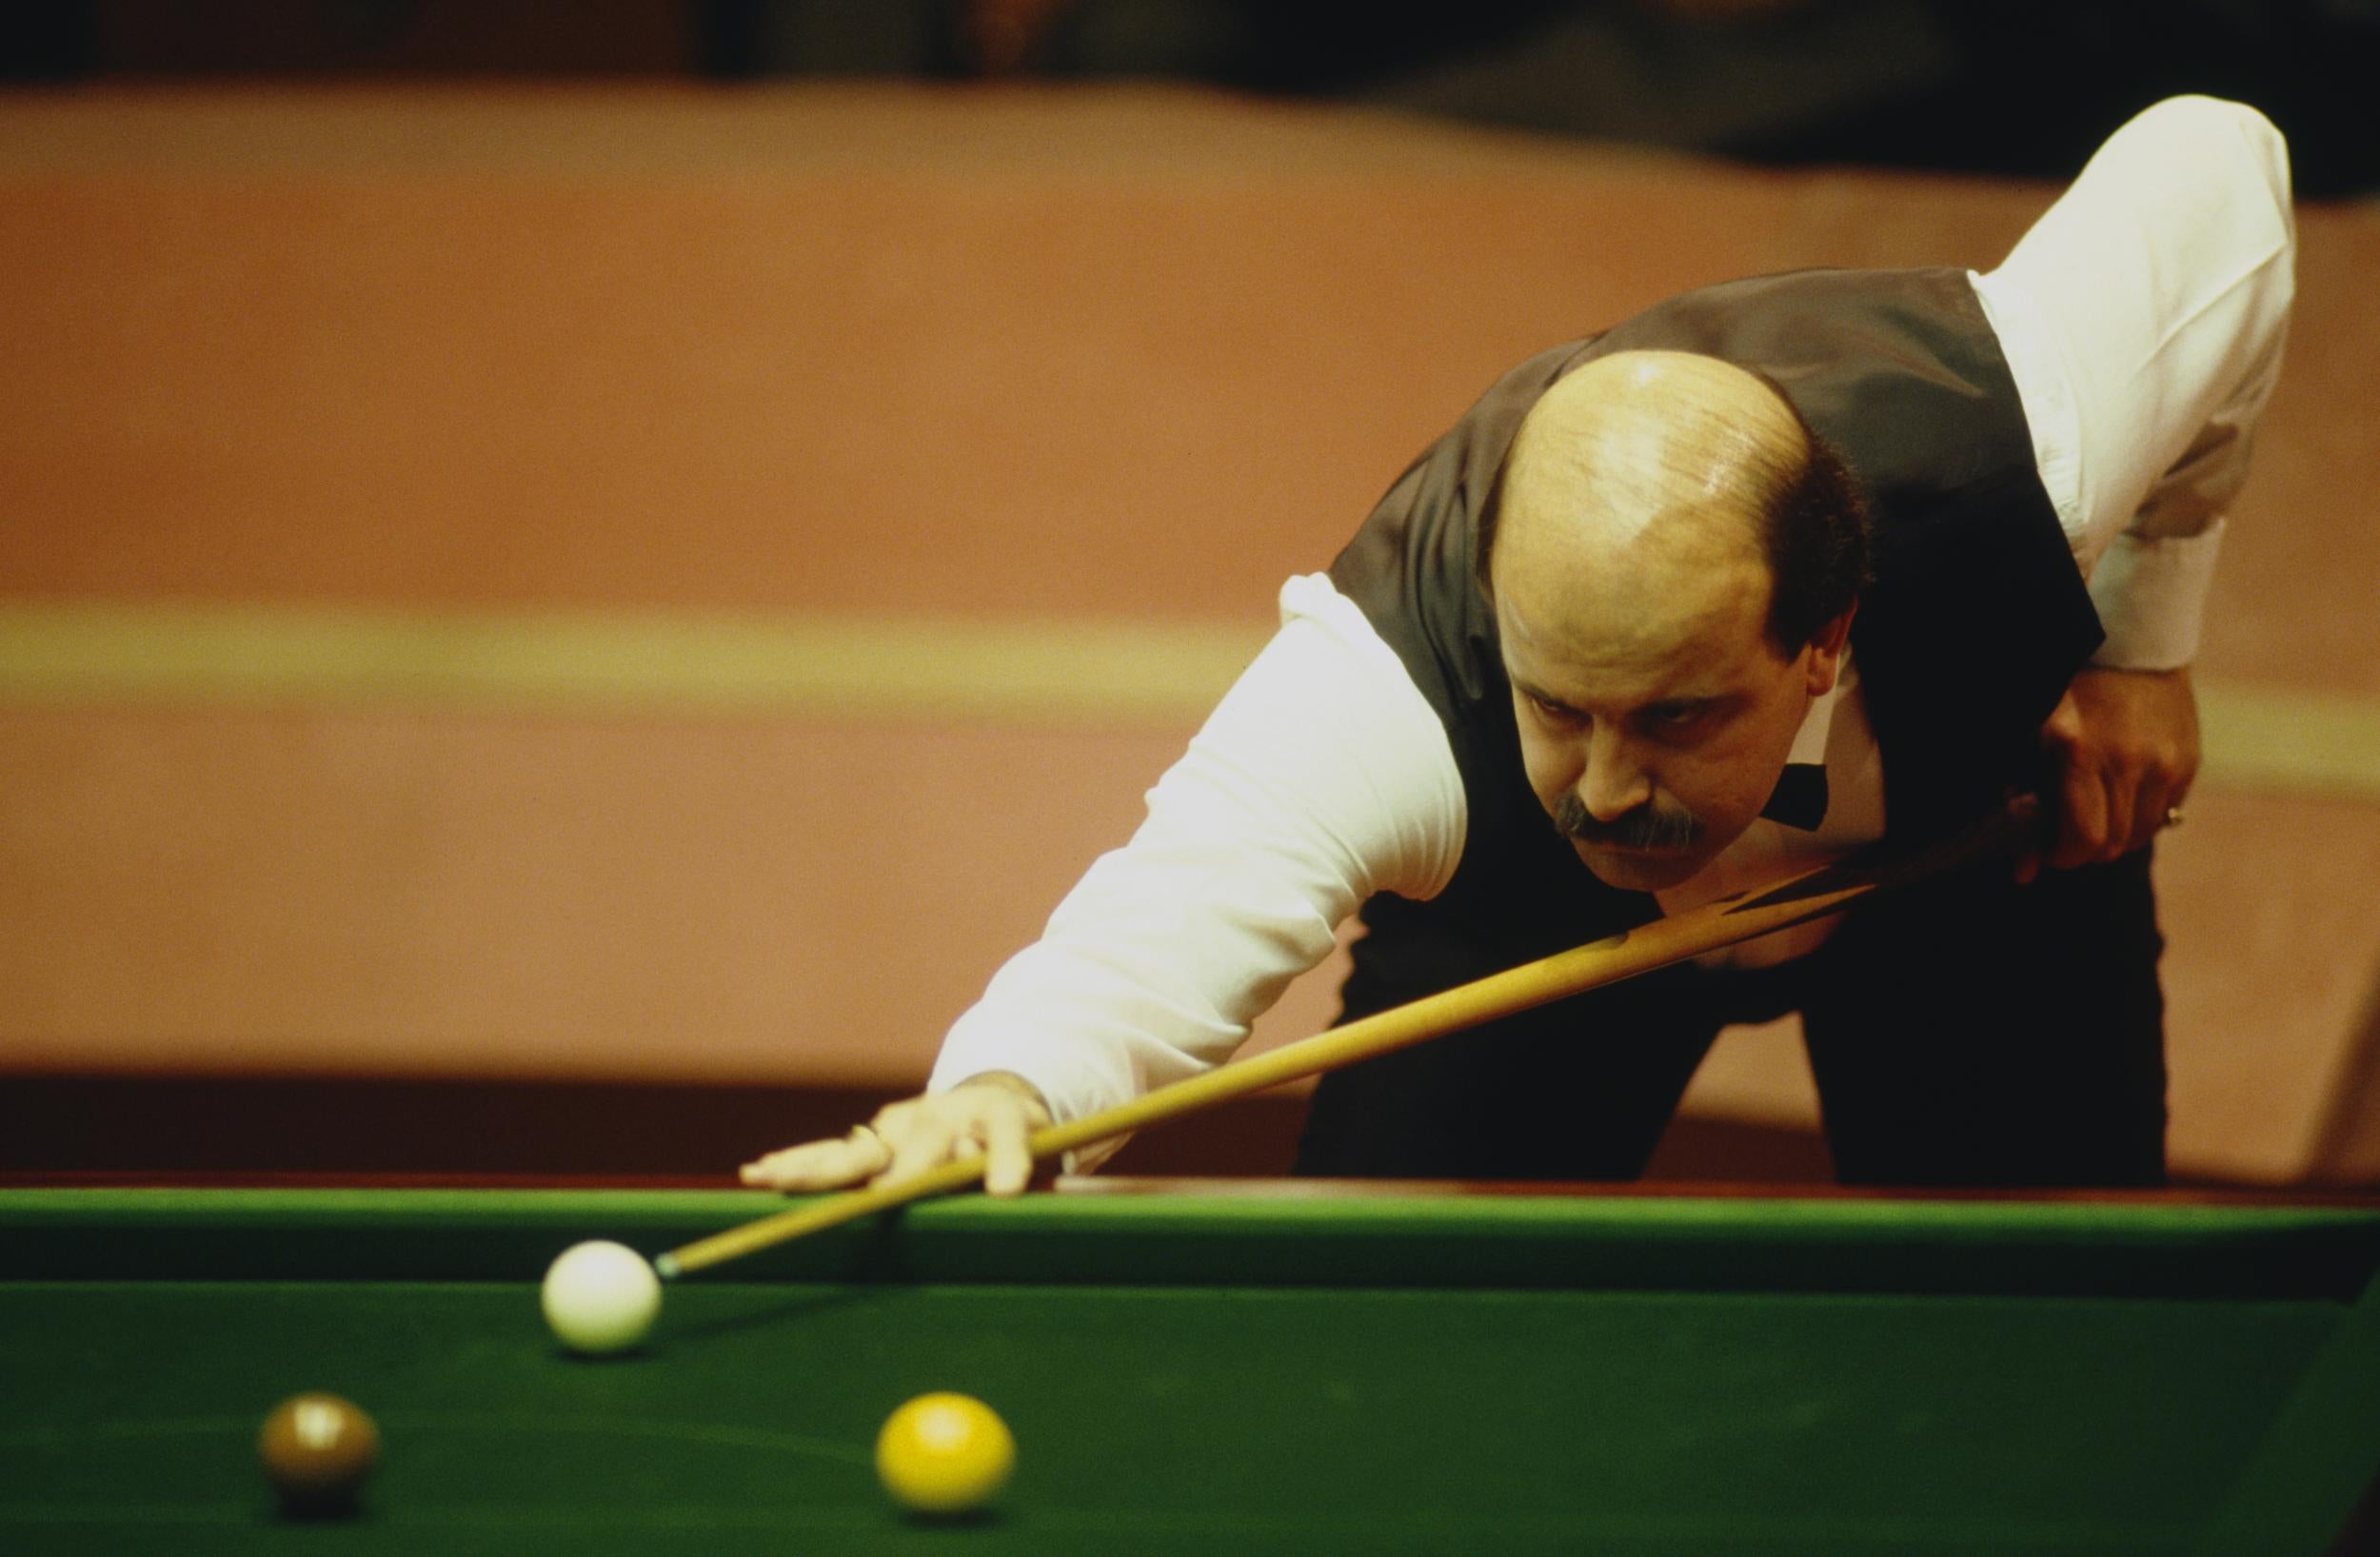 At the World Snooker Championship in Sheffield, 1988